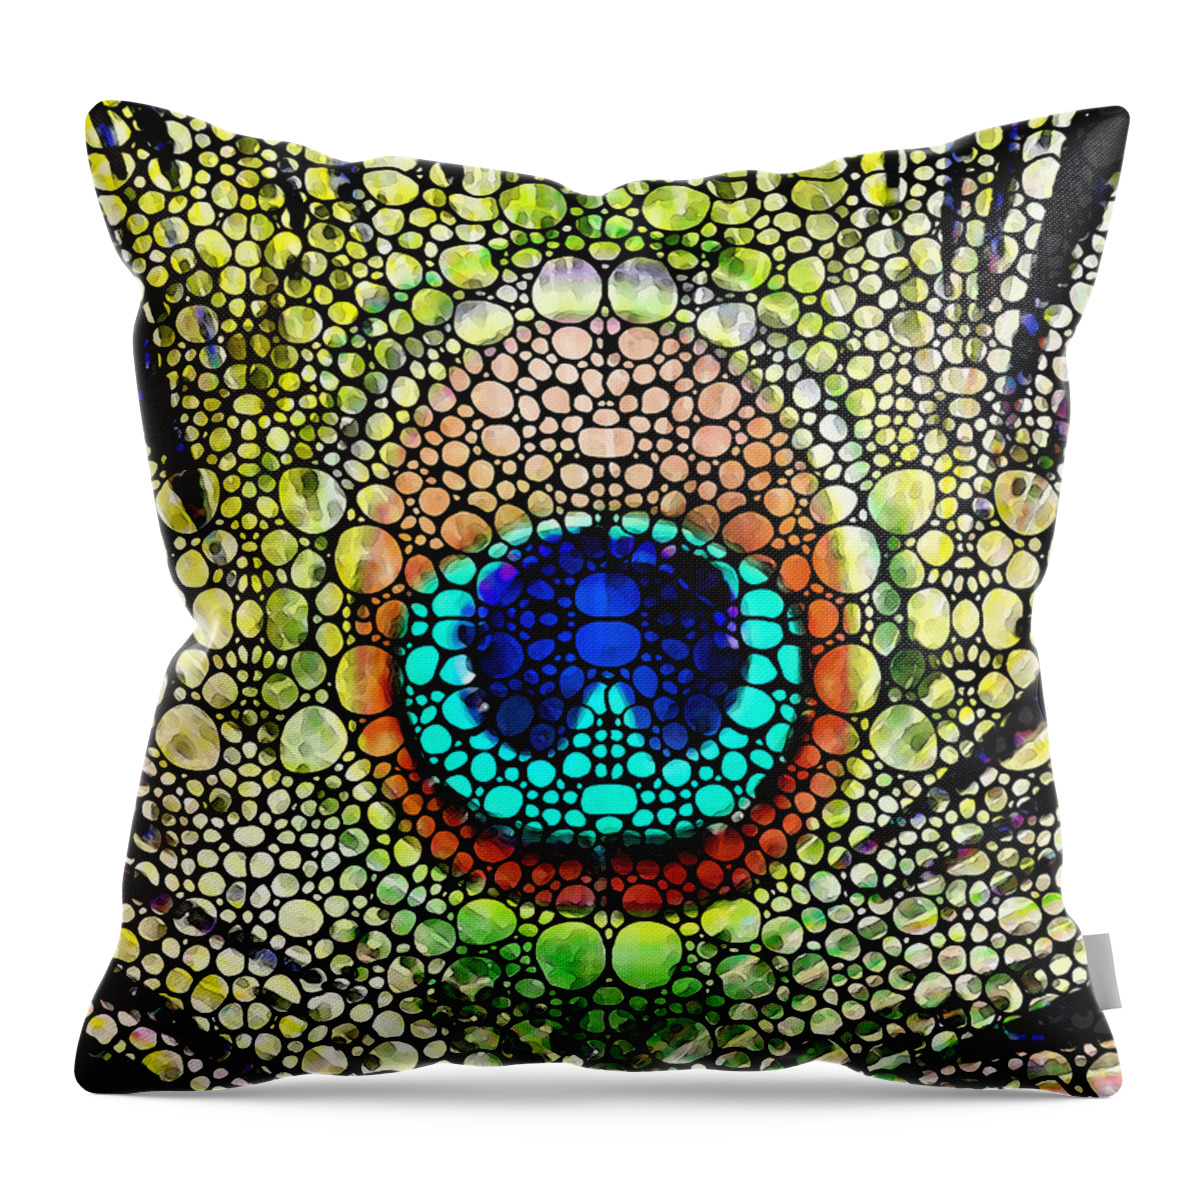 Peacock Throw Pillow featuring the painting Peacock Feather - Stone Rock'd Art by Sharon Cummings by Sharon Cummings